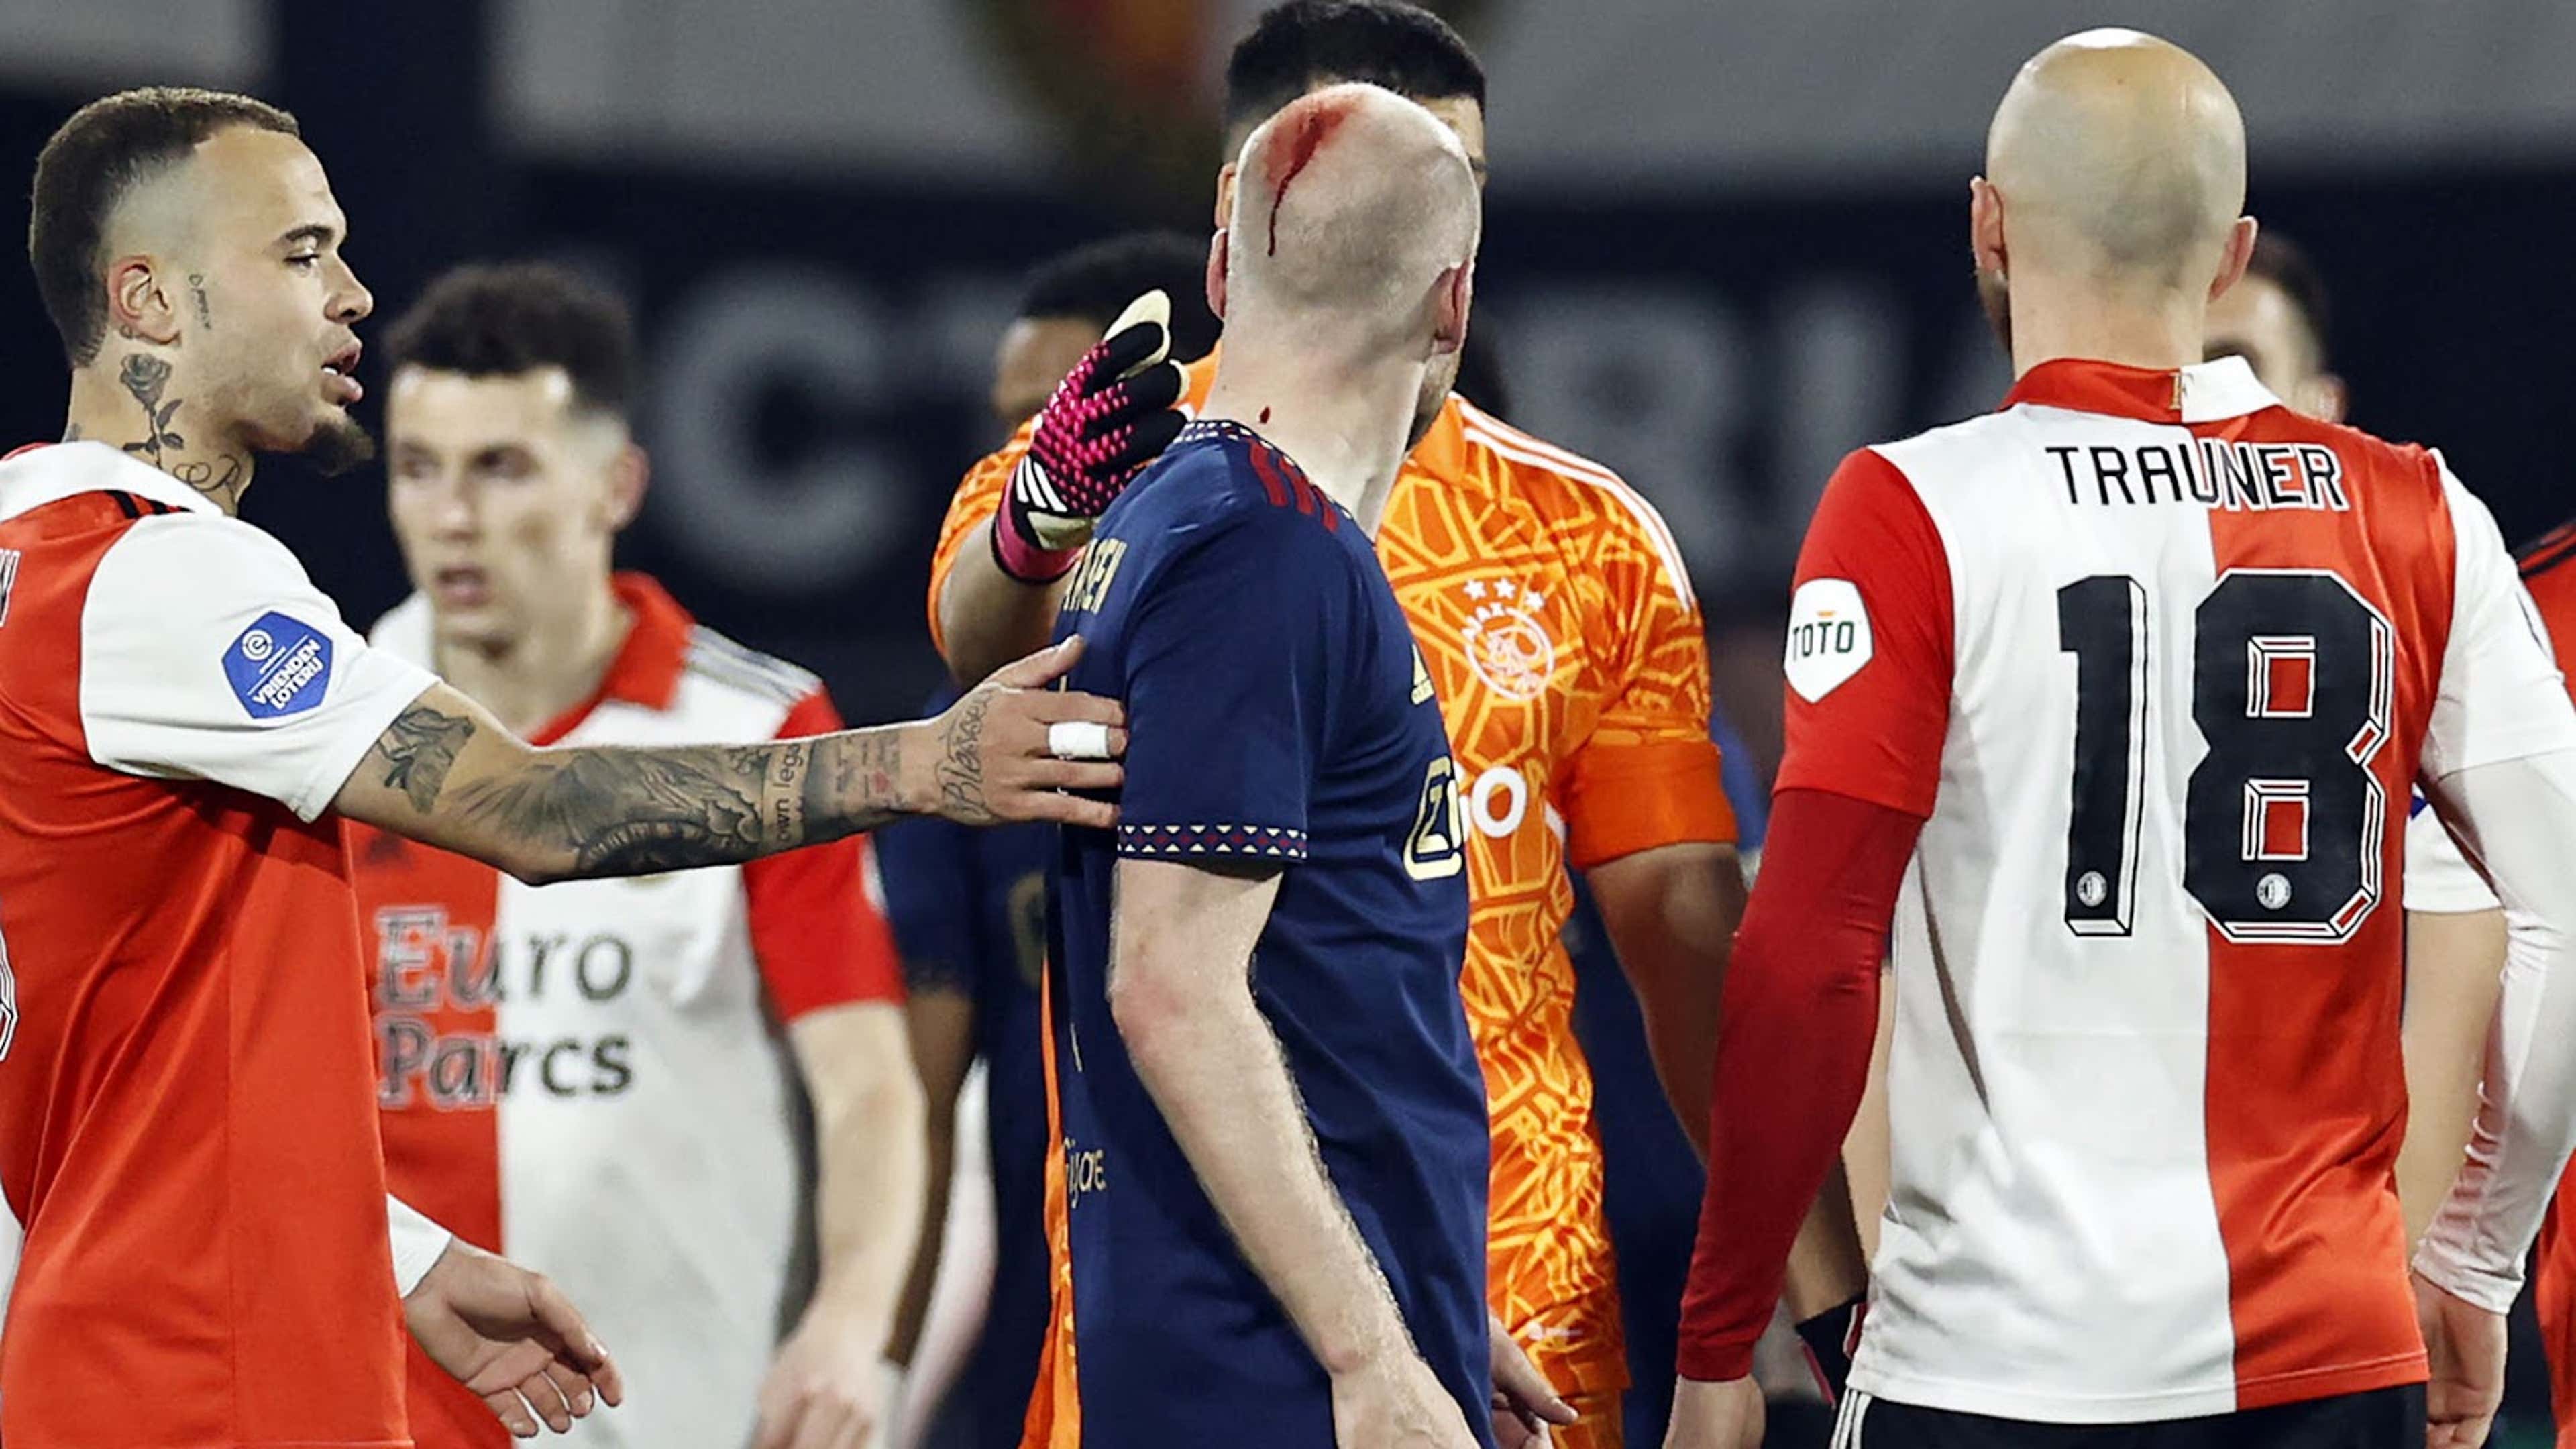 zwanger attribuut Warmte Ajax's Davy Klaassen bloodied by fan projectile in scary scenes as KNVB Cup  match against Feyenoord stopped | Goal.com